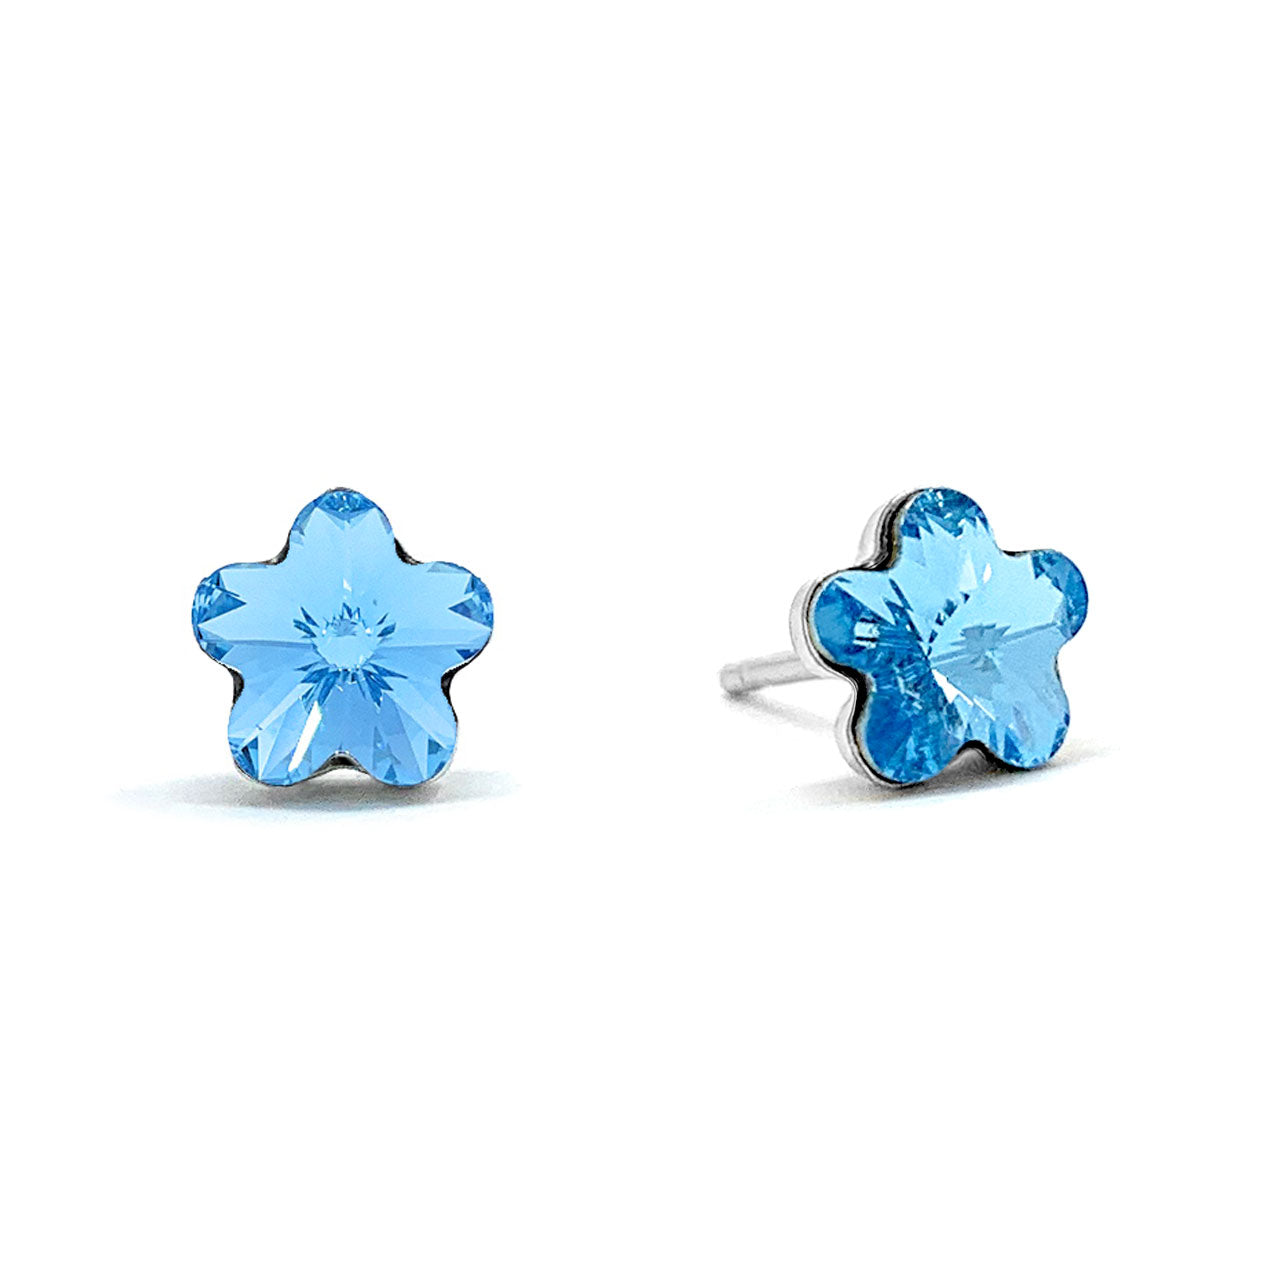 Anna Small Stud Earrings with Blue Aquamarine Flower Crystals from Swarovski Silver Toned Rhodium Plated - Ed Heart